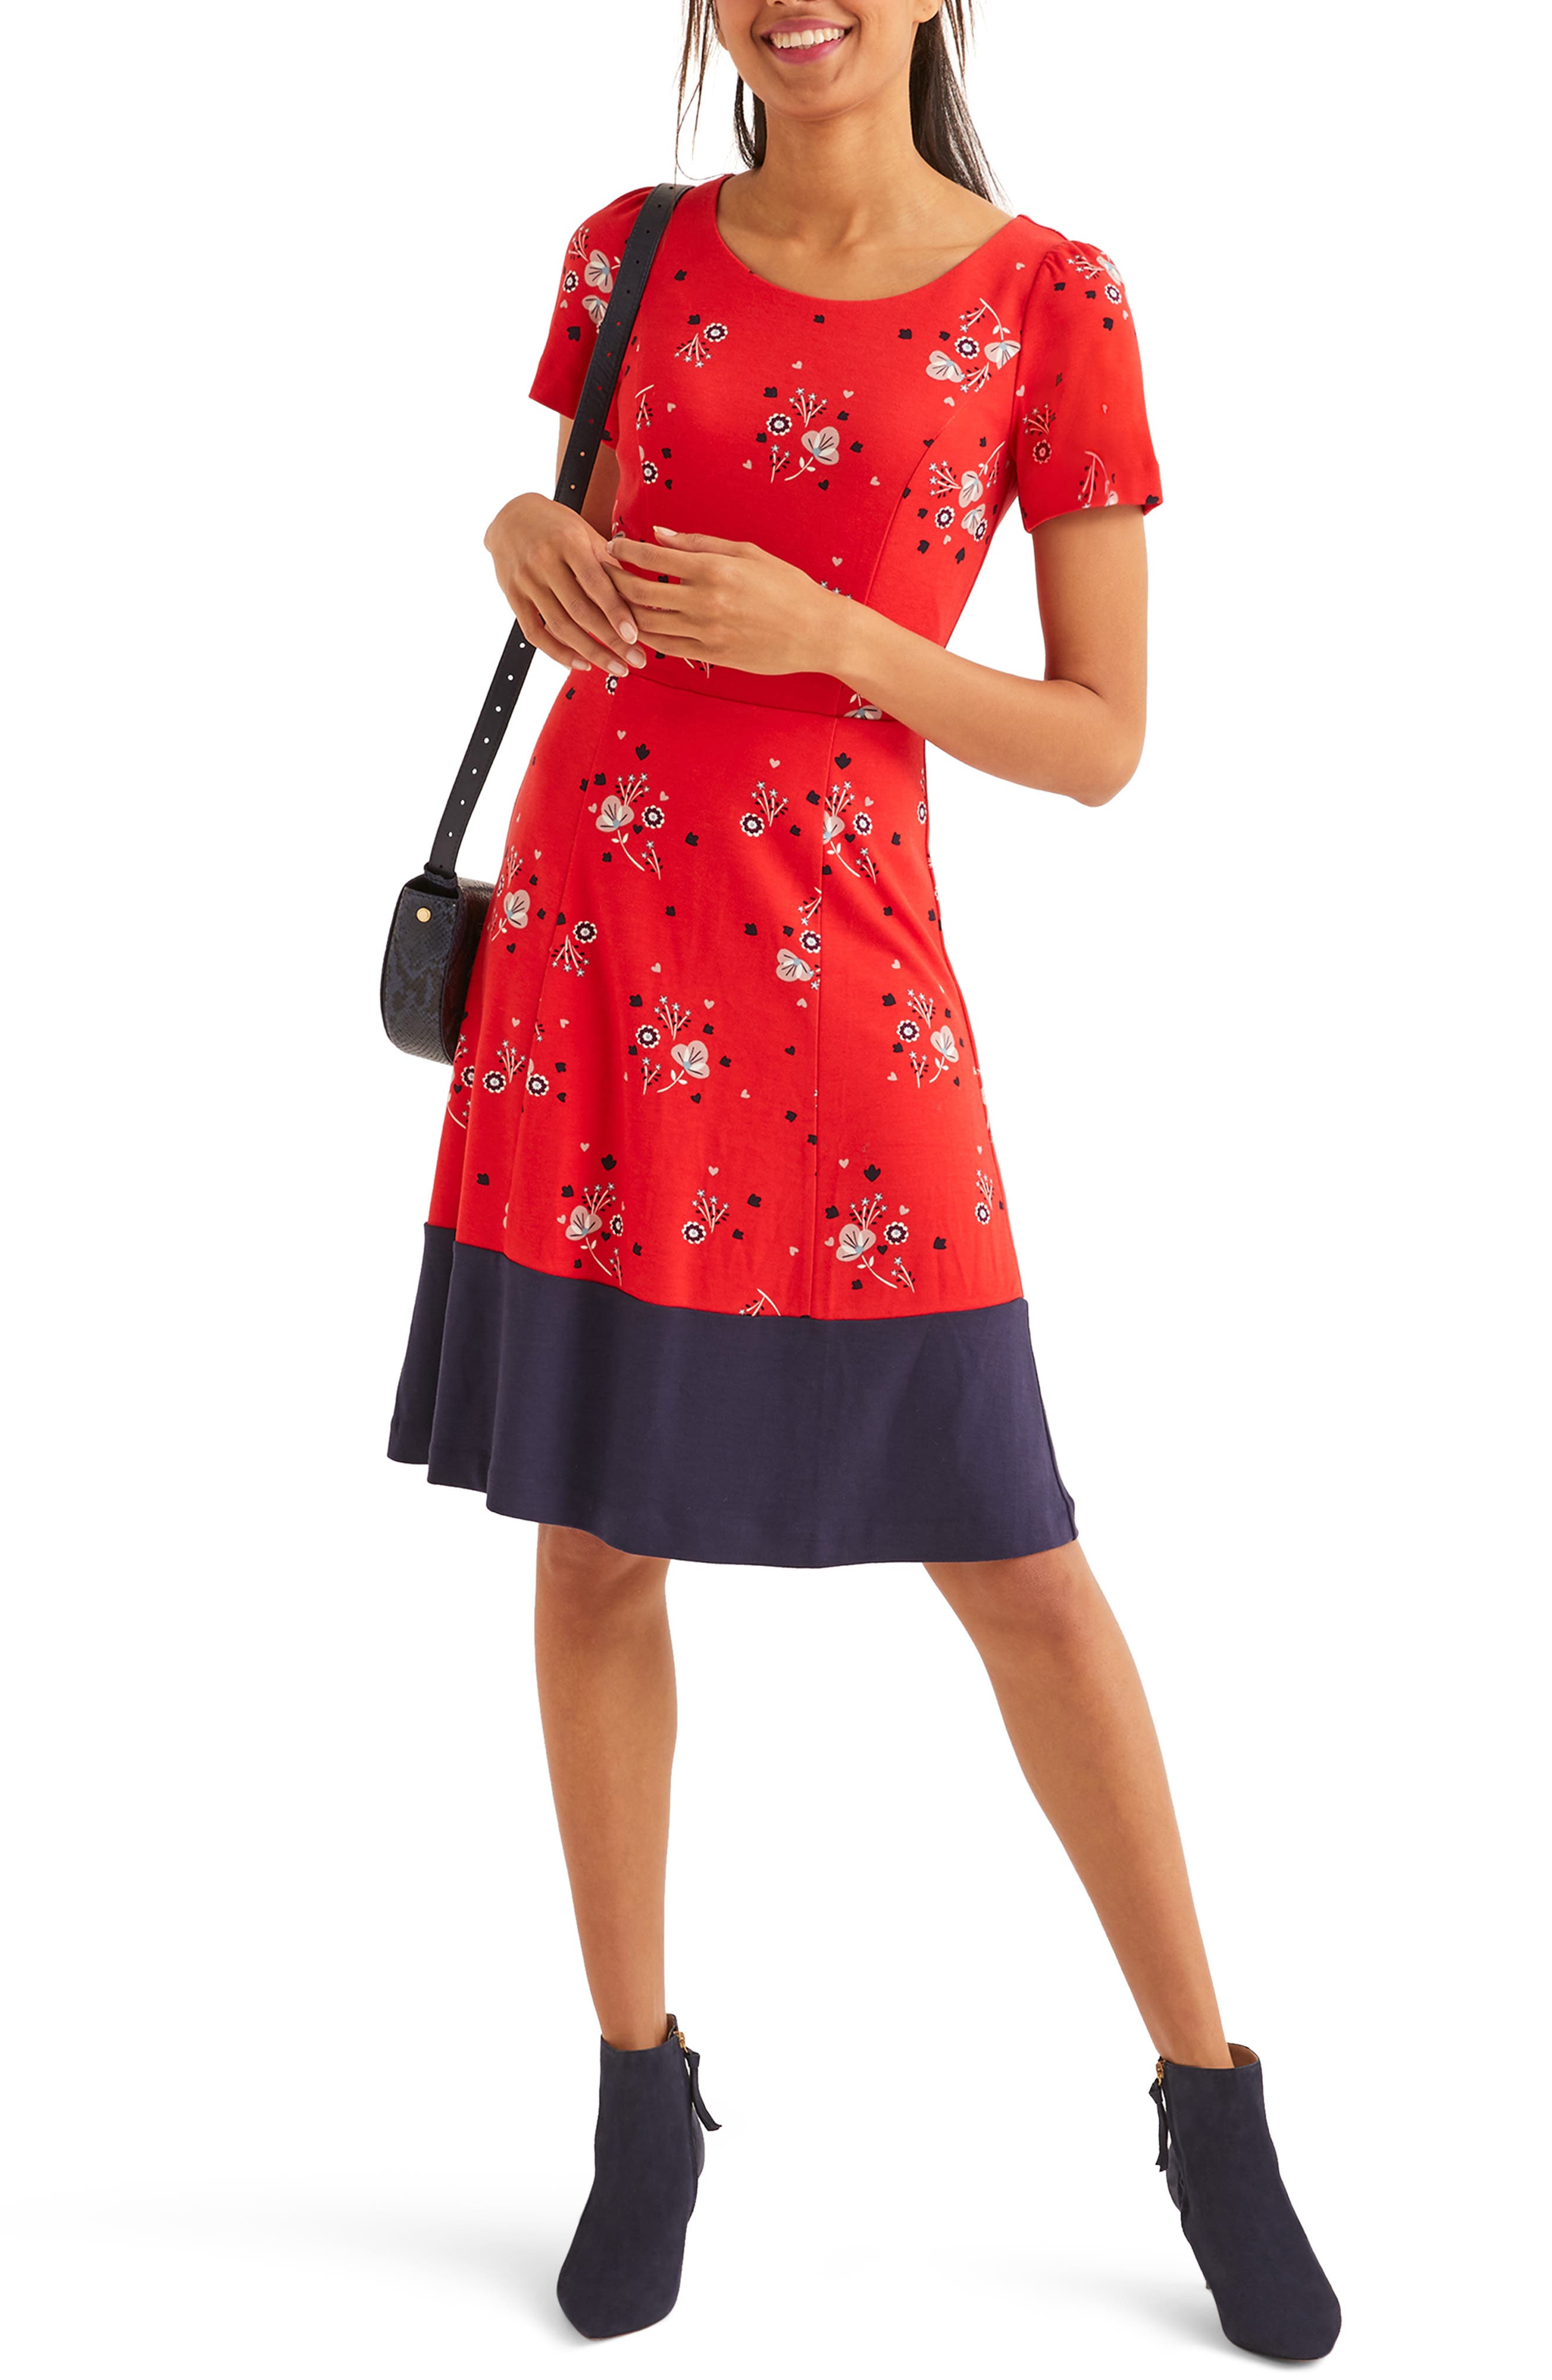 boden fit and flare dress